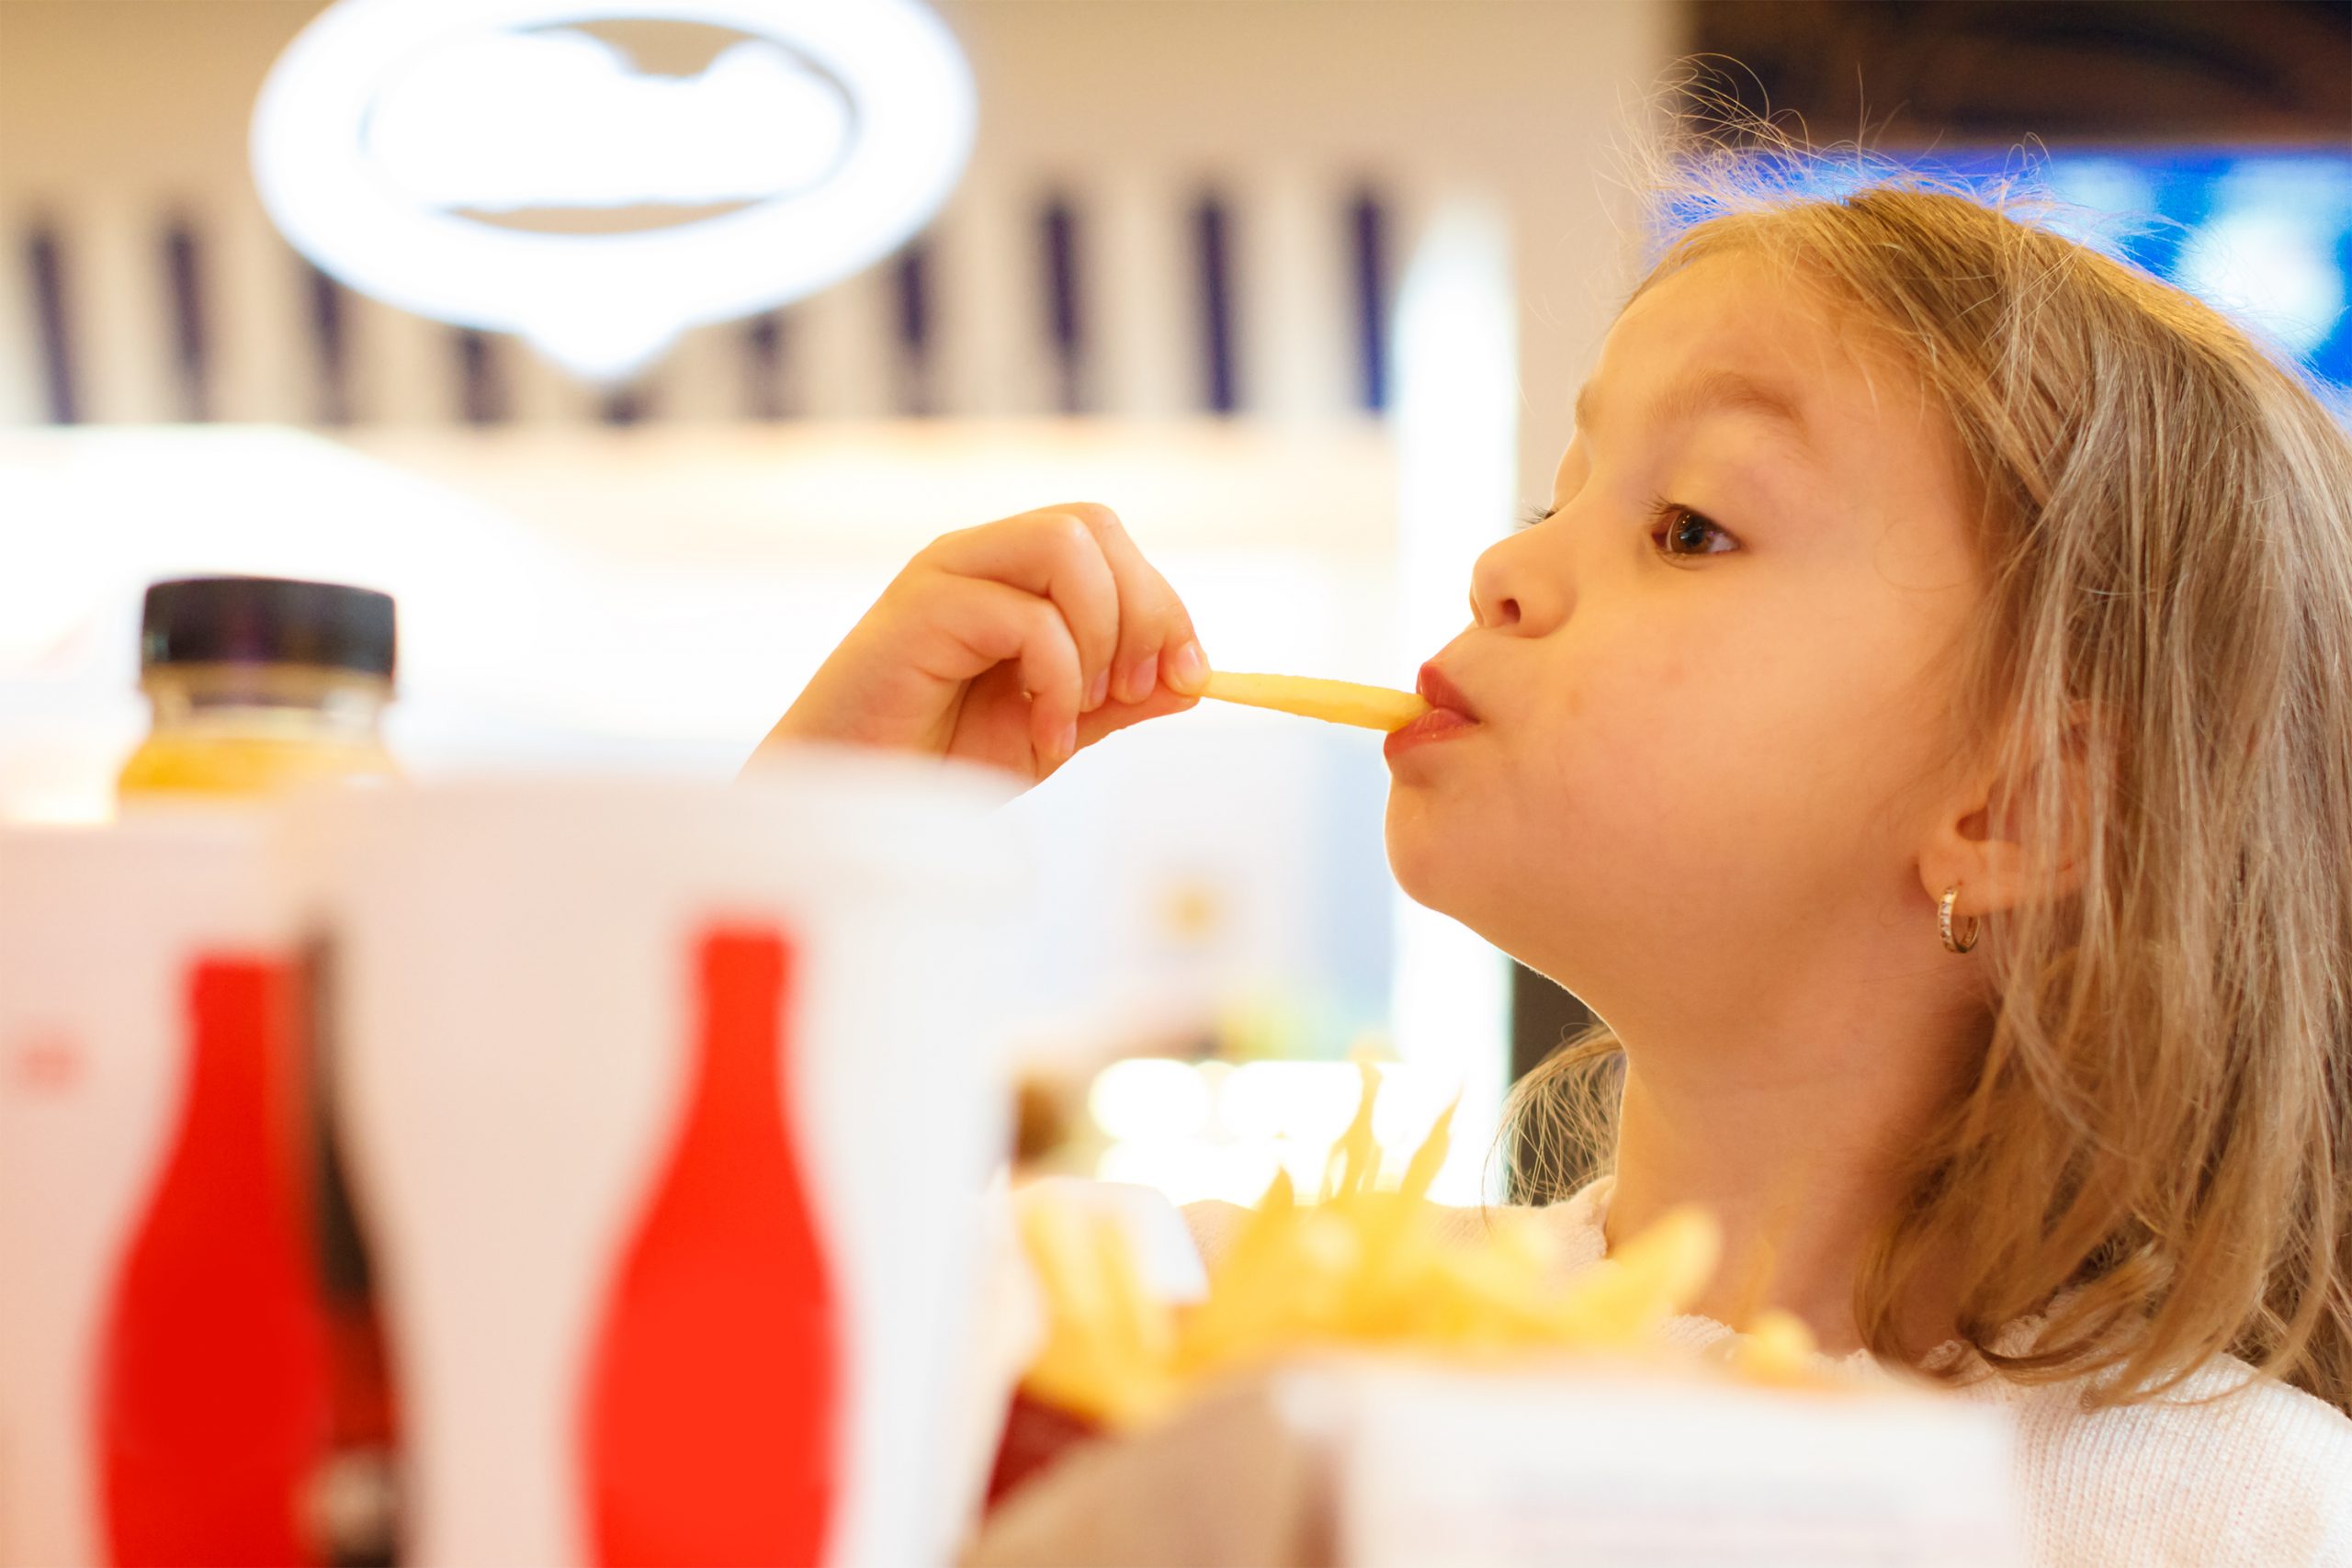 kids-eating-fast-food-thedecline